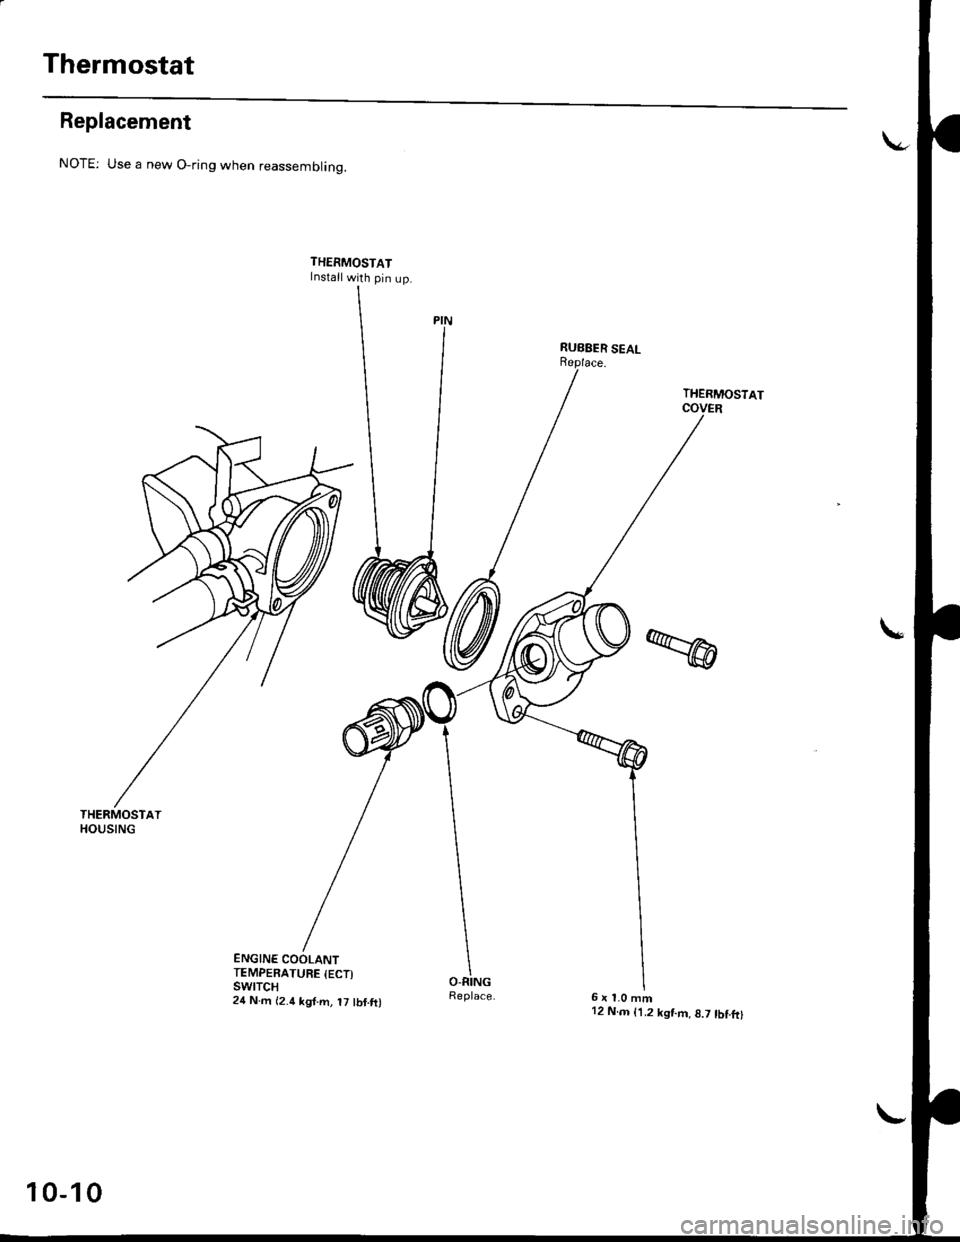 HONDA CIVIC 1996 6.G Workshop Manual Thermostat
Replacement
THERMOSTATHOUSING
NOTE: Use a new O-ring when reassemblinq.
THERMOSTATInstall with pin up.
ENGINE COOLANTTEMPERATURE {ECT)swtTcH24 N.m {2.4 kgf.m, t7 tbf.ft)
THERMOSTAT
6x1.0mm1